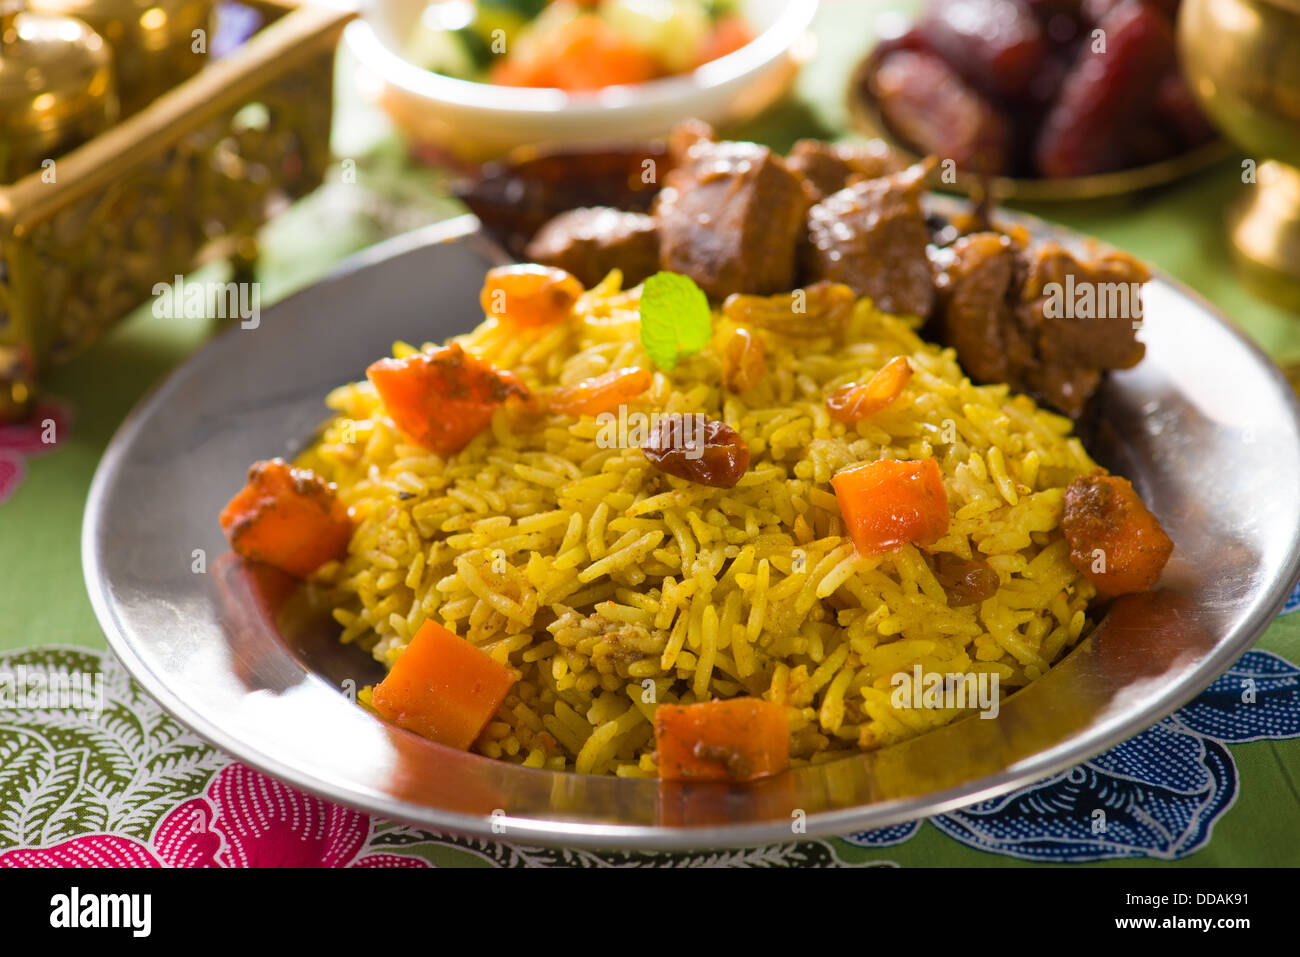 arabic rice, ramadan foods in middle east usually served with tandoor lamb Stock Photo